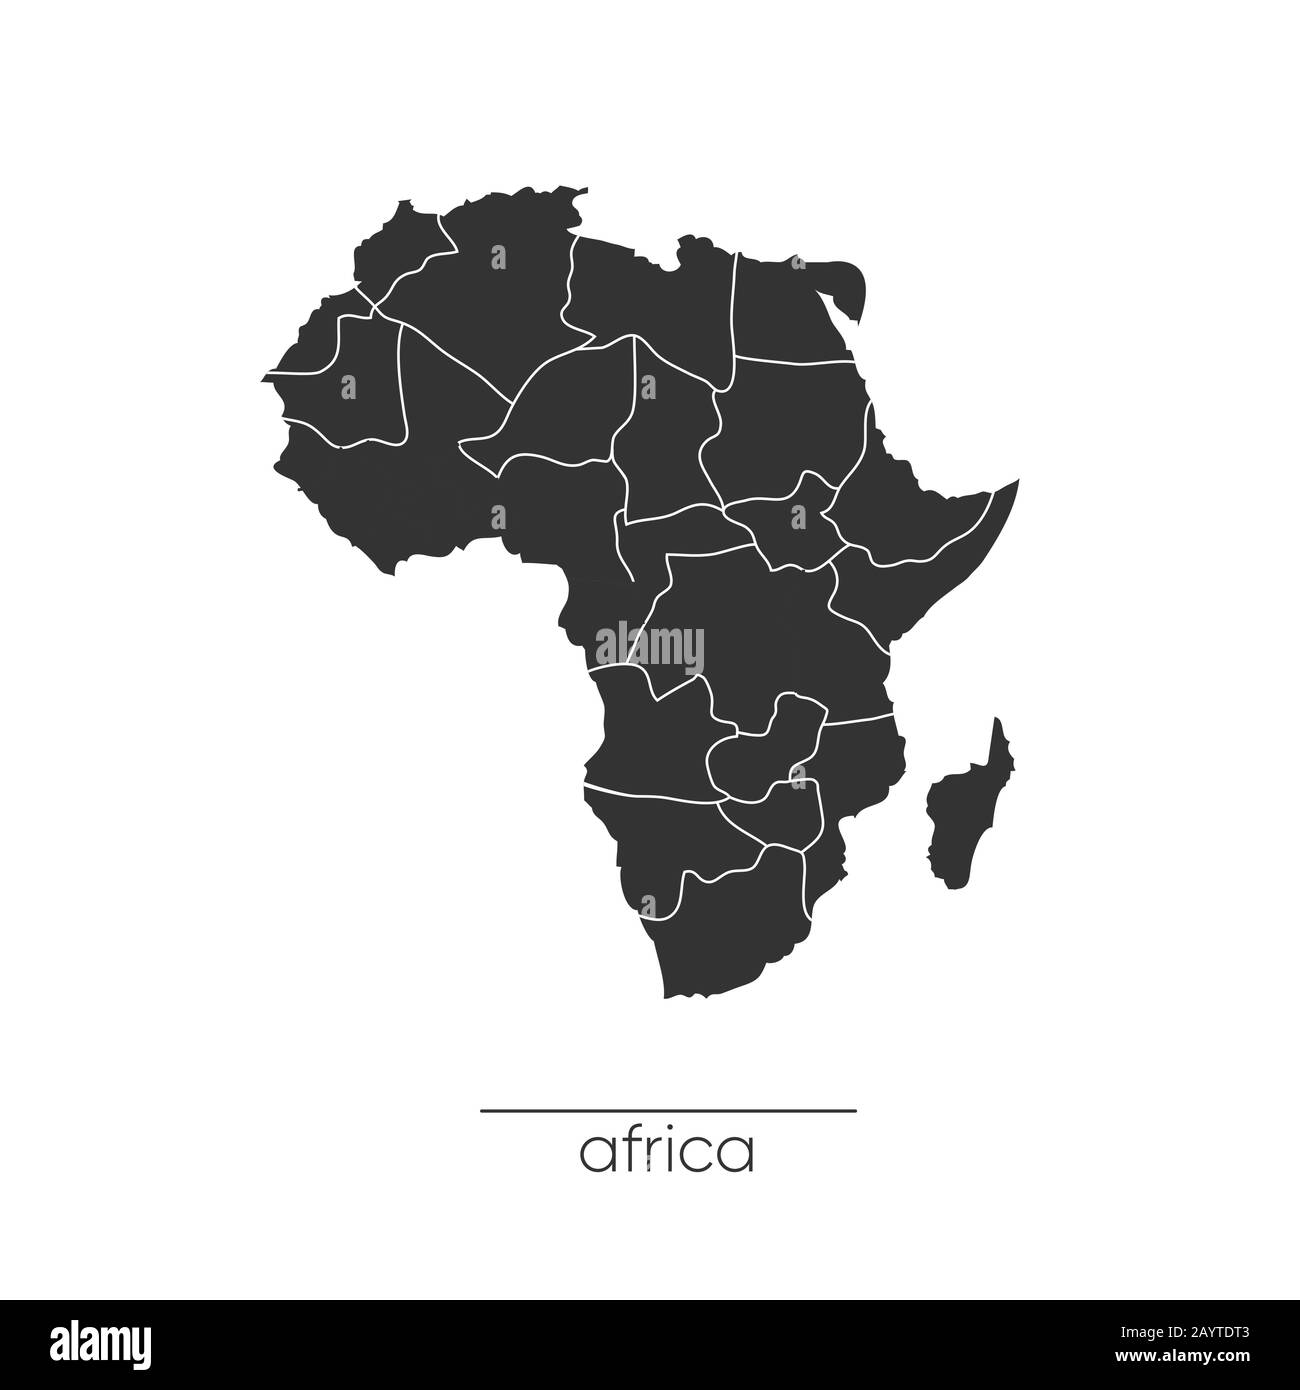 Africa map. Monochrome Africa continent icon. Vector Stock Vector